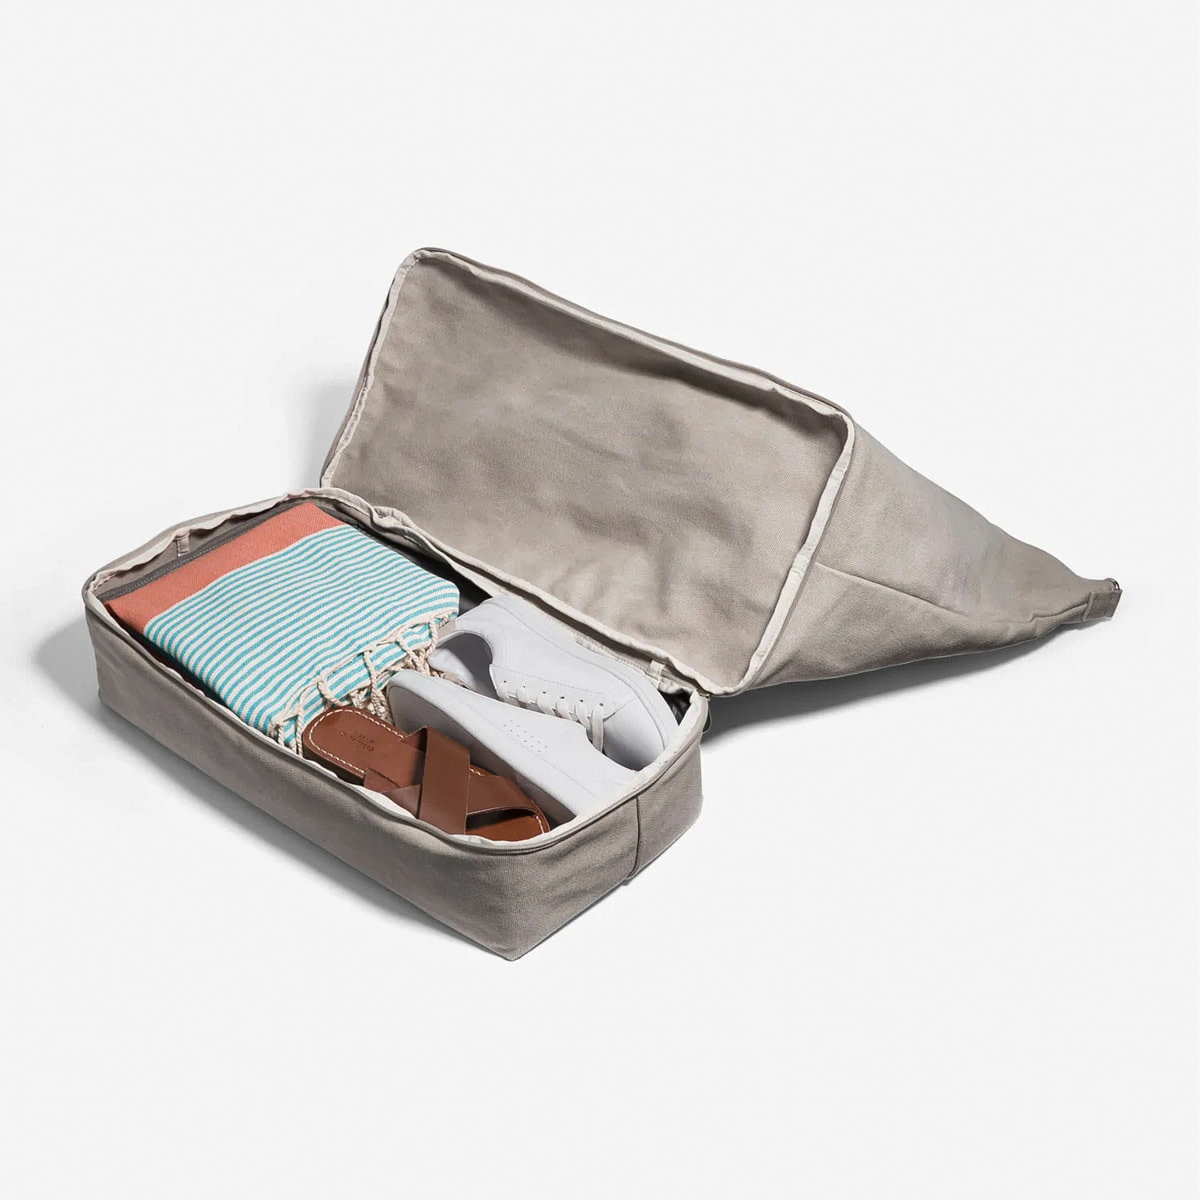 Weekend bag with a shoe compartment at the bottom